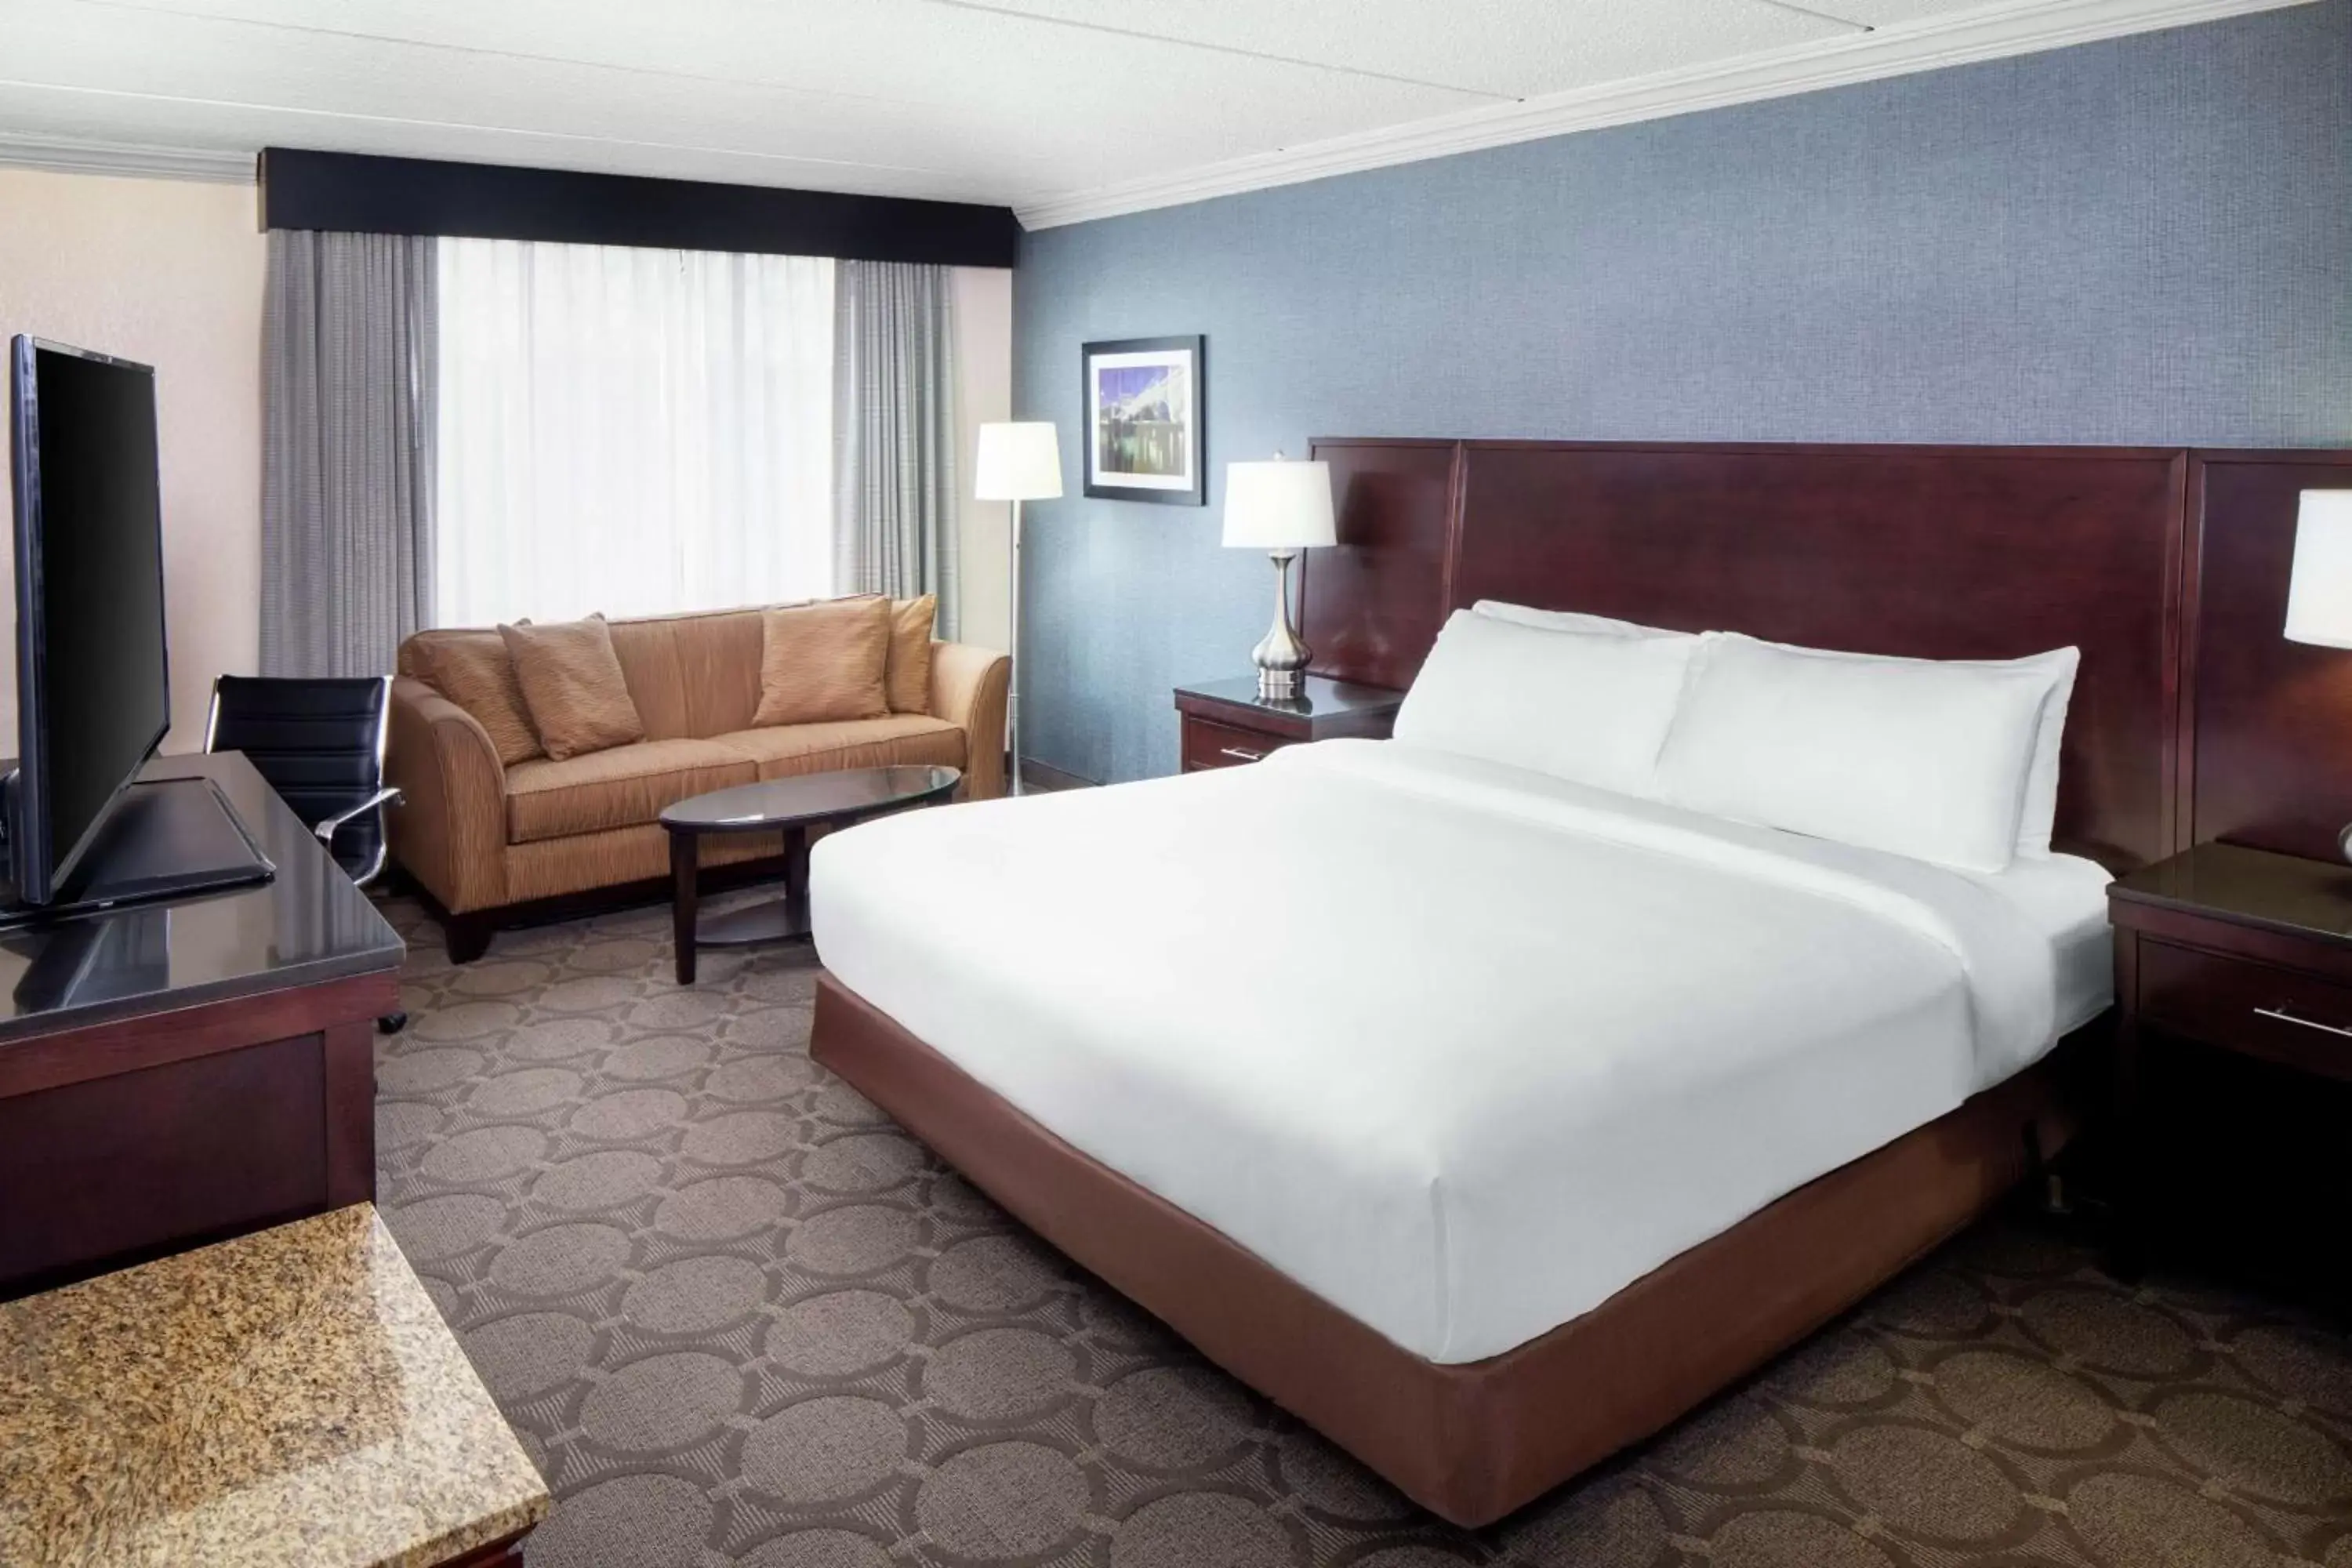 Bedroom in DoubleTree by Hilton Hotel Cleveland - Independence